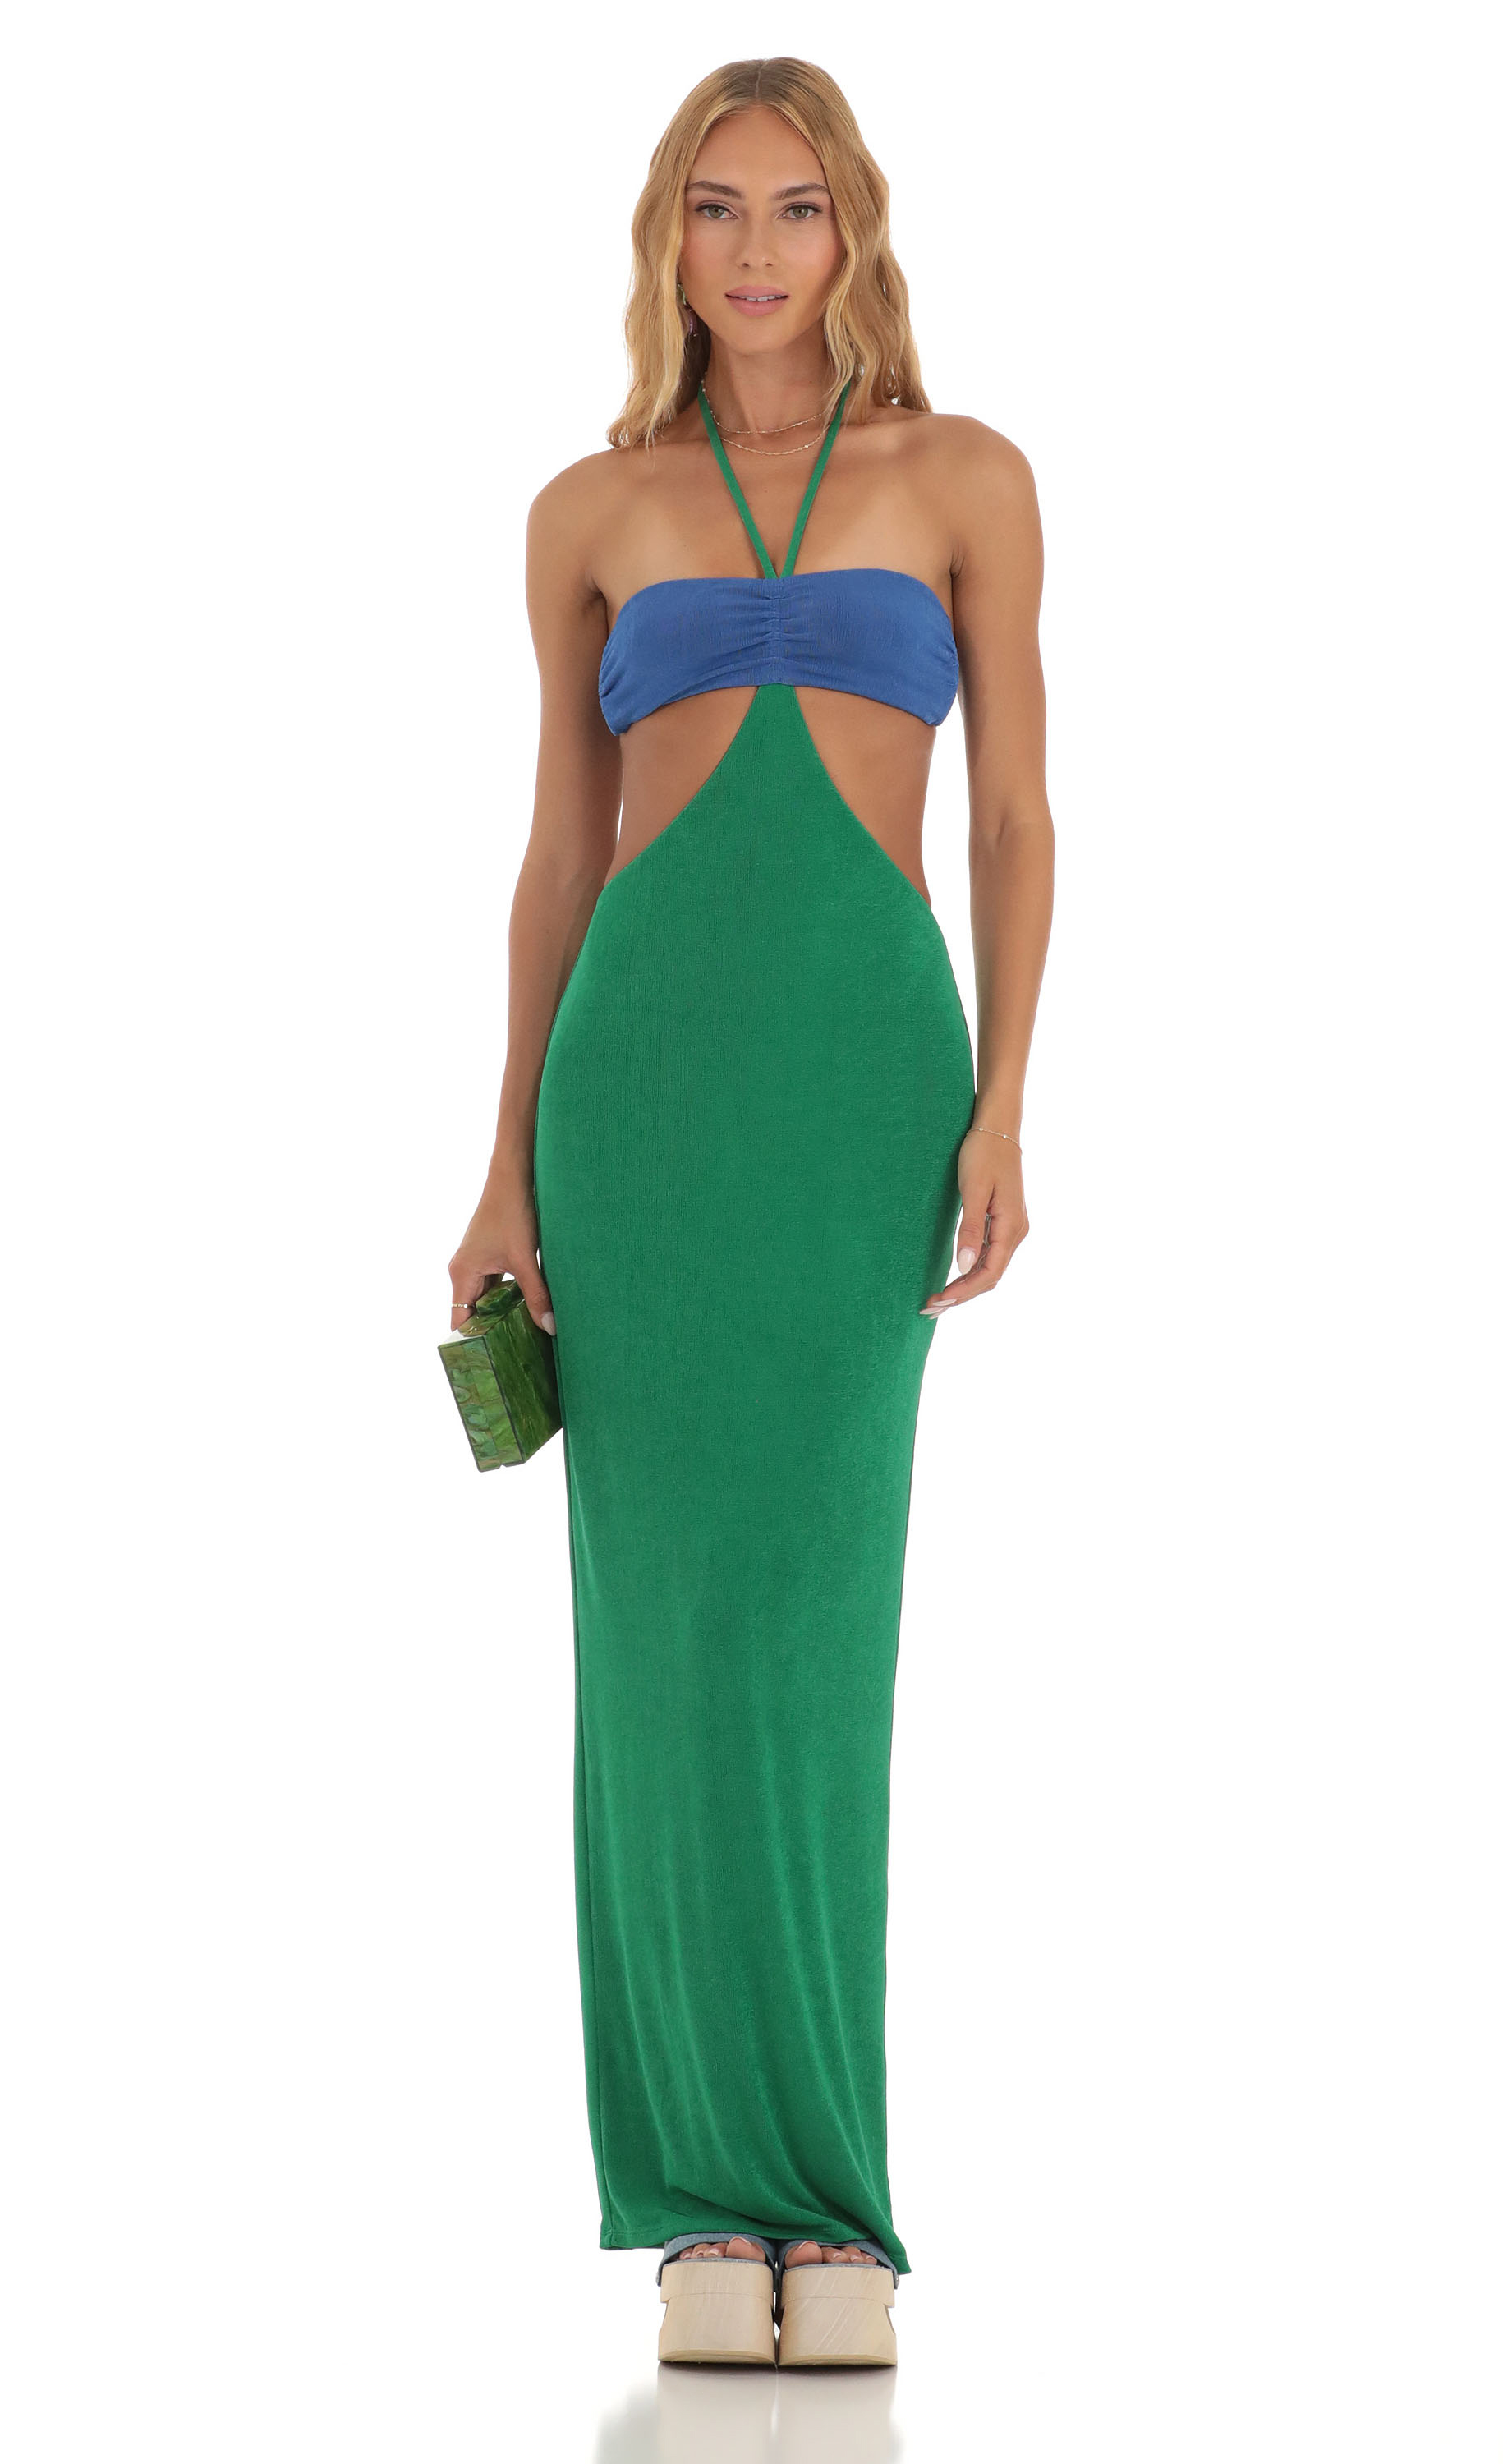 Sonora Two Toned Cutout Maxi Dress in Blue and Green